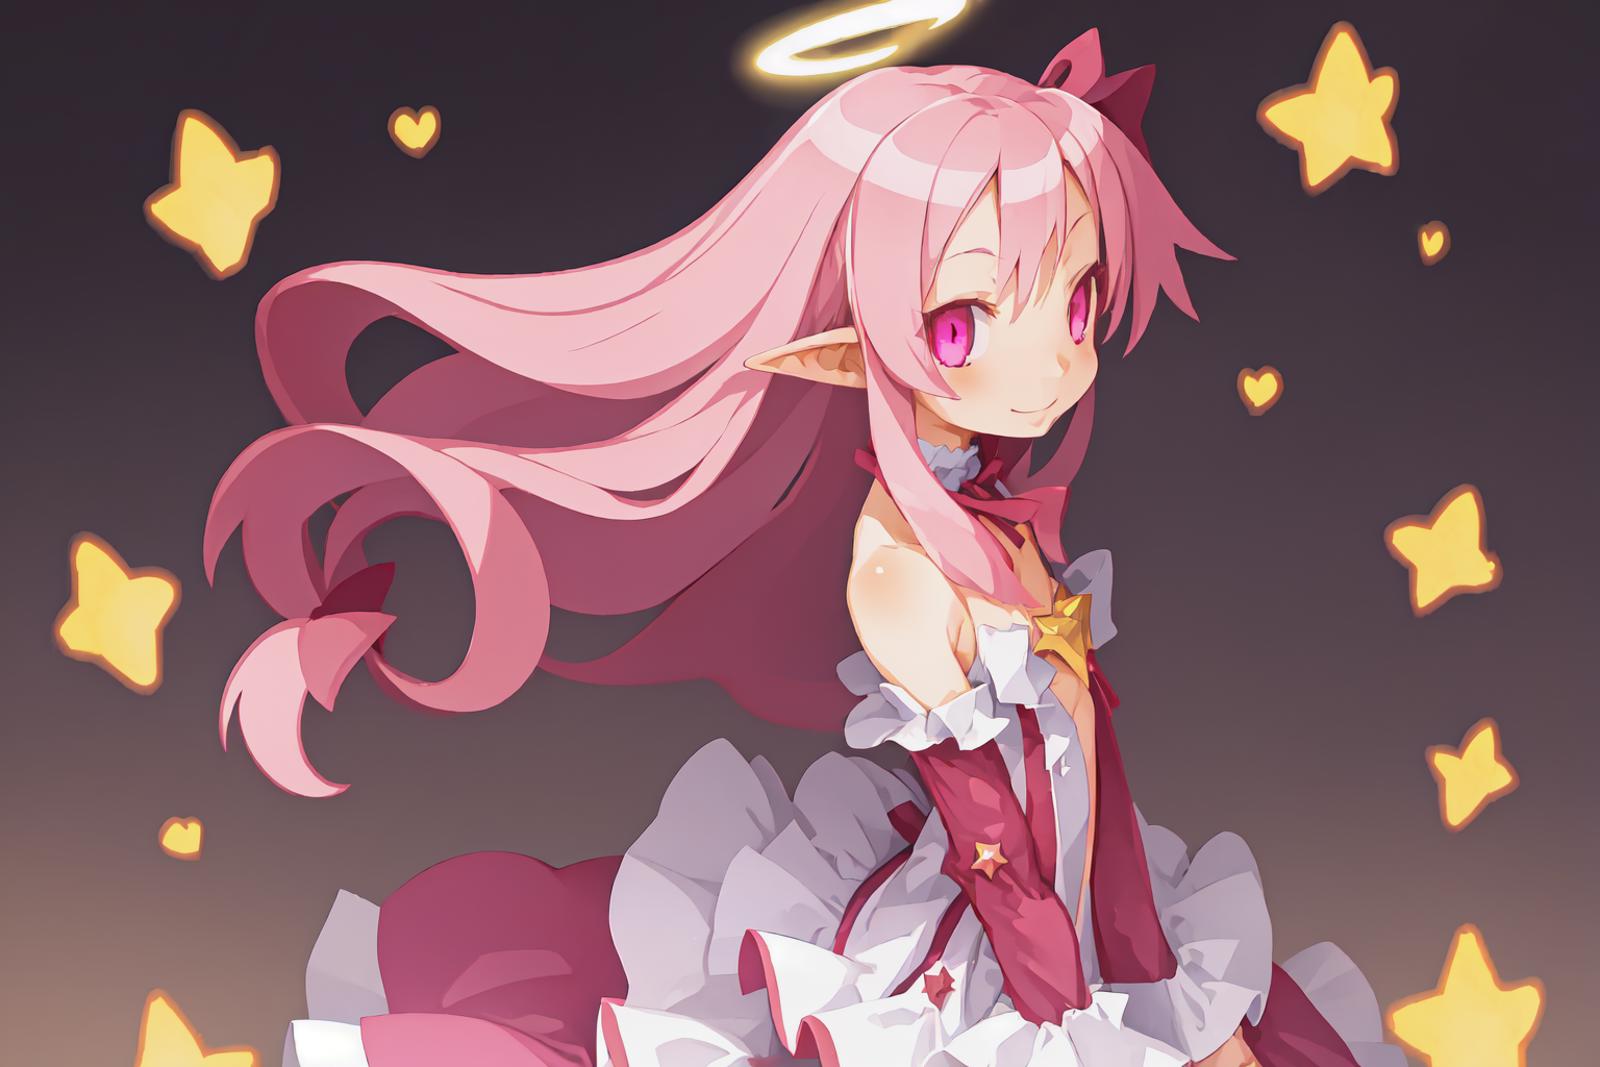 Disgaea Style 魔界戦記ディスガイア image by fanasthesia